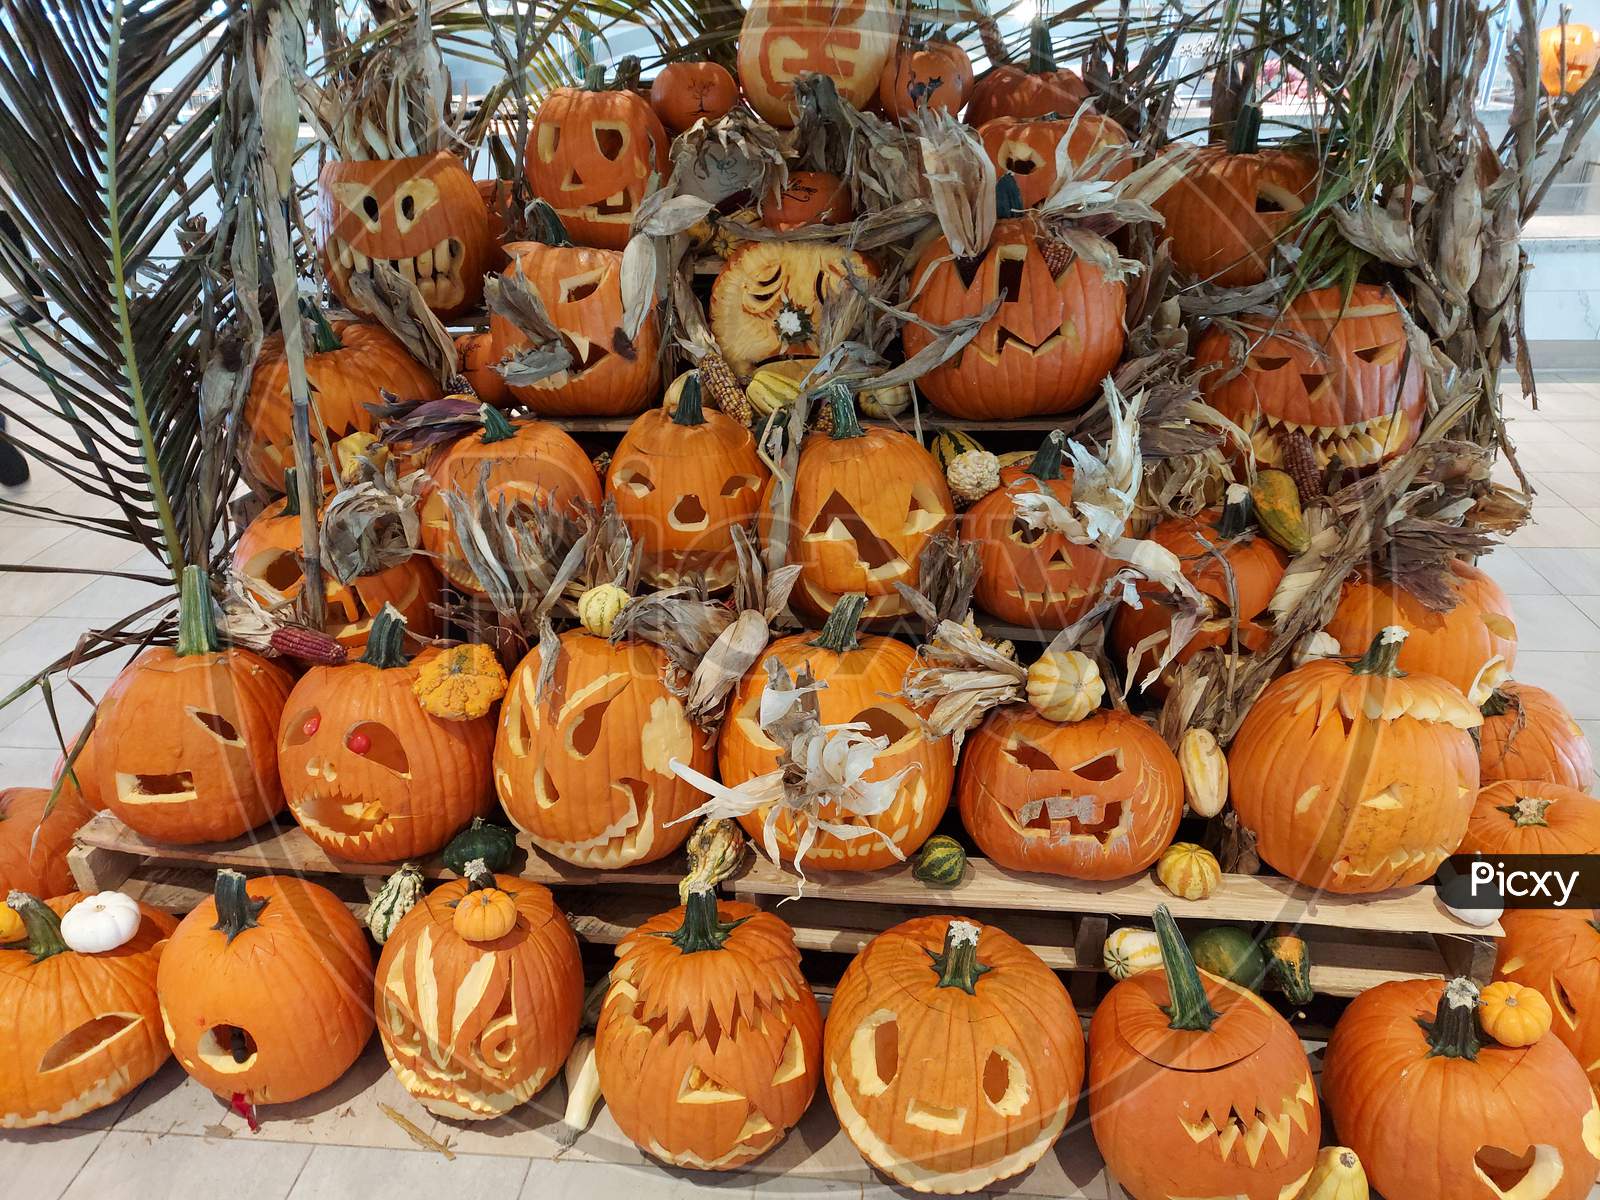 A Number Of Scary Faced Pumpkins Carvings Display For Halloween